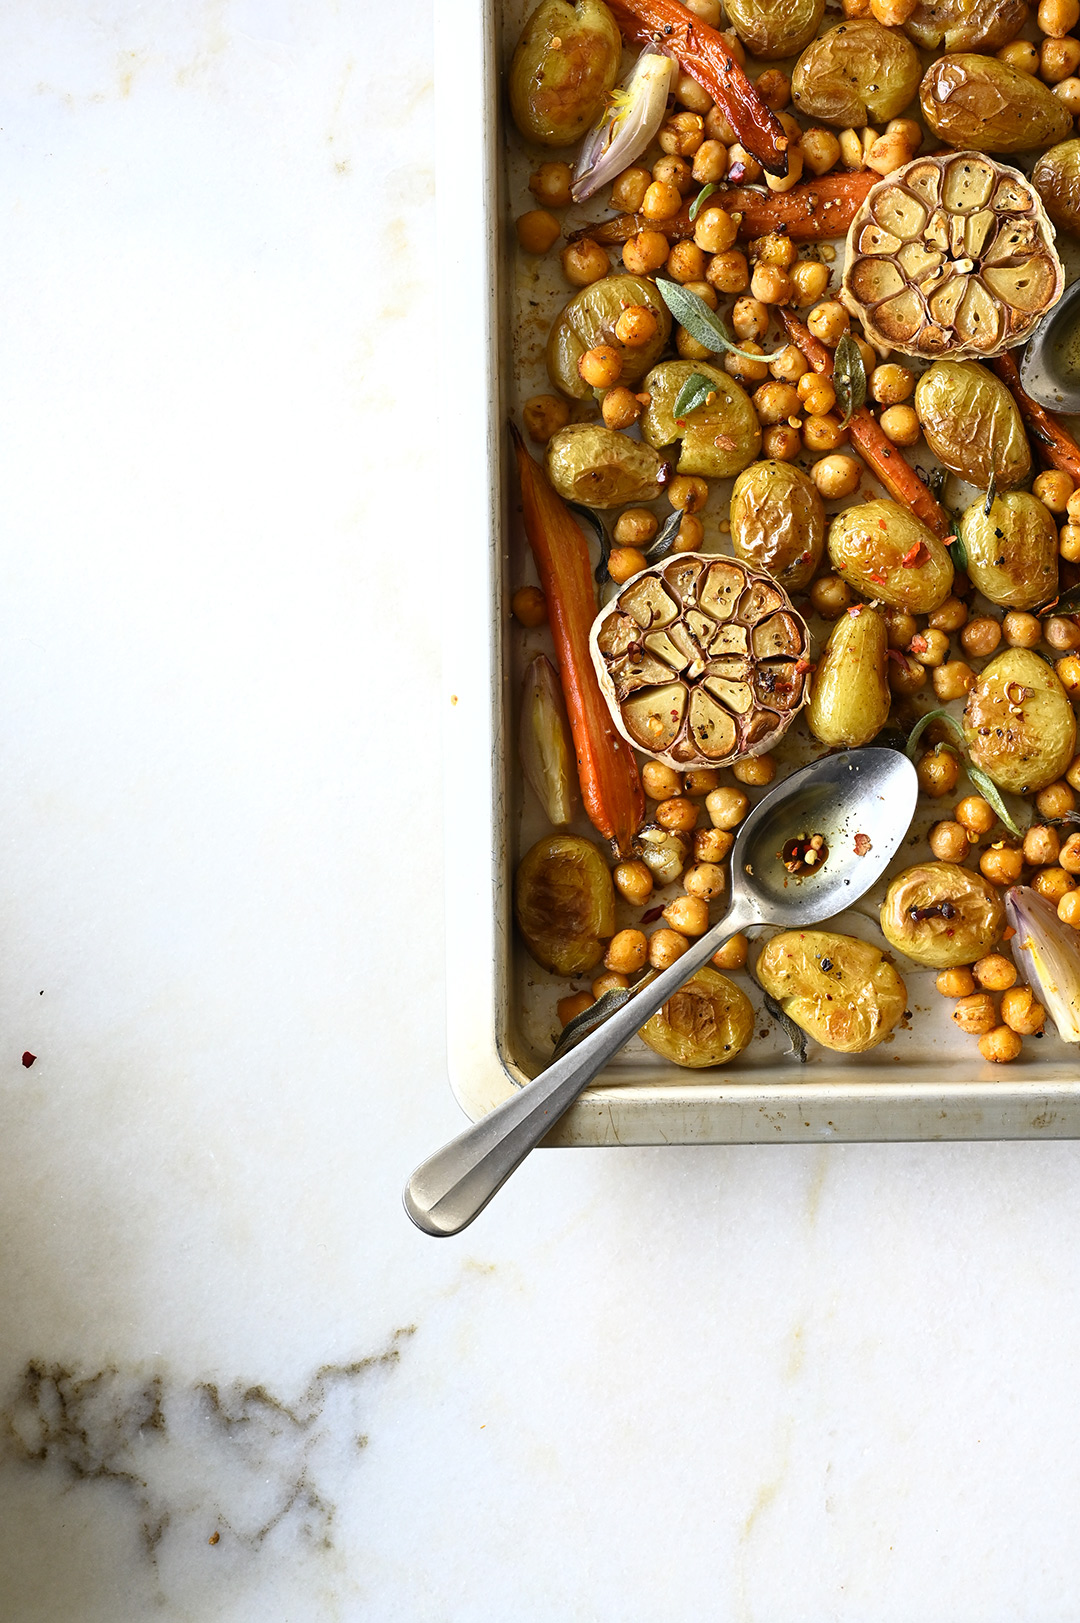 serving dumplings | Easy roasted potato and crunchy chickpea salad